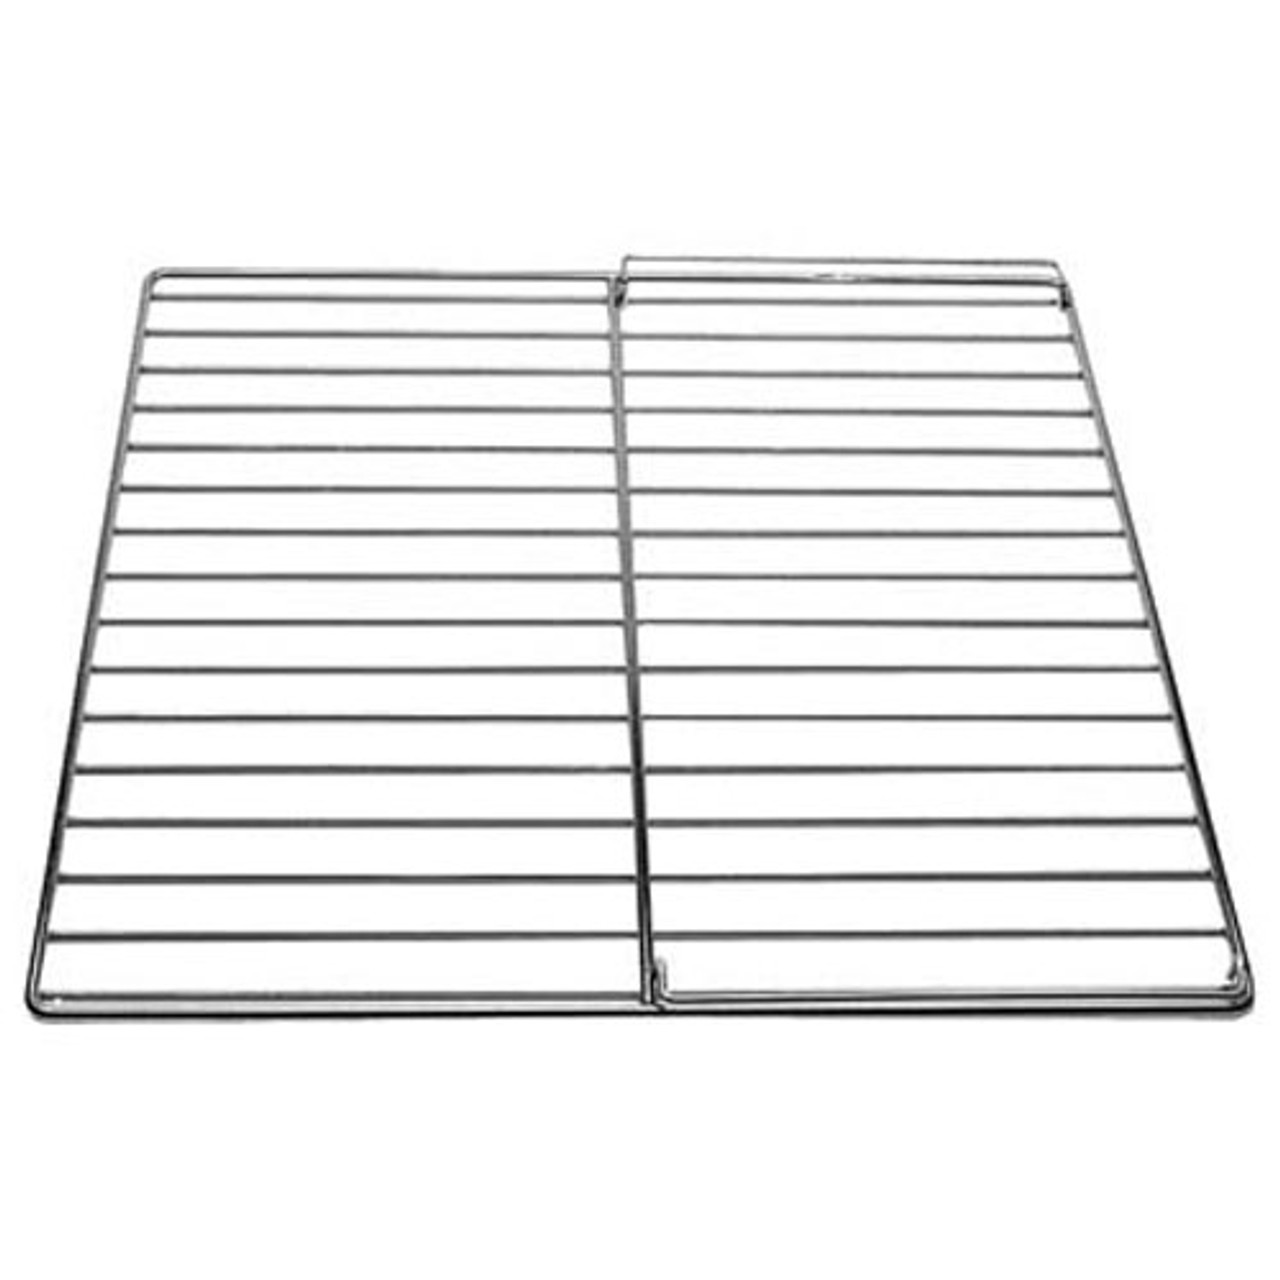 Oven Rack 25 F/B X 25.25 L/R - Replacement Part For Southbend 1000315CP